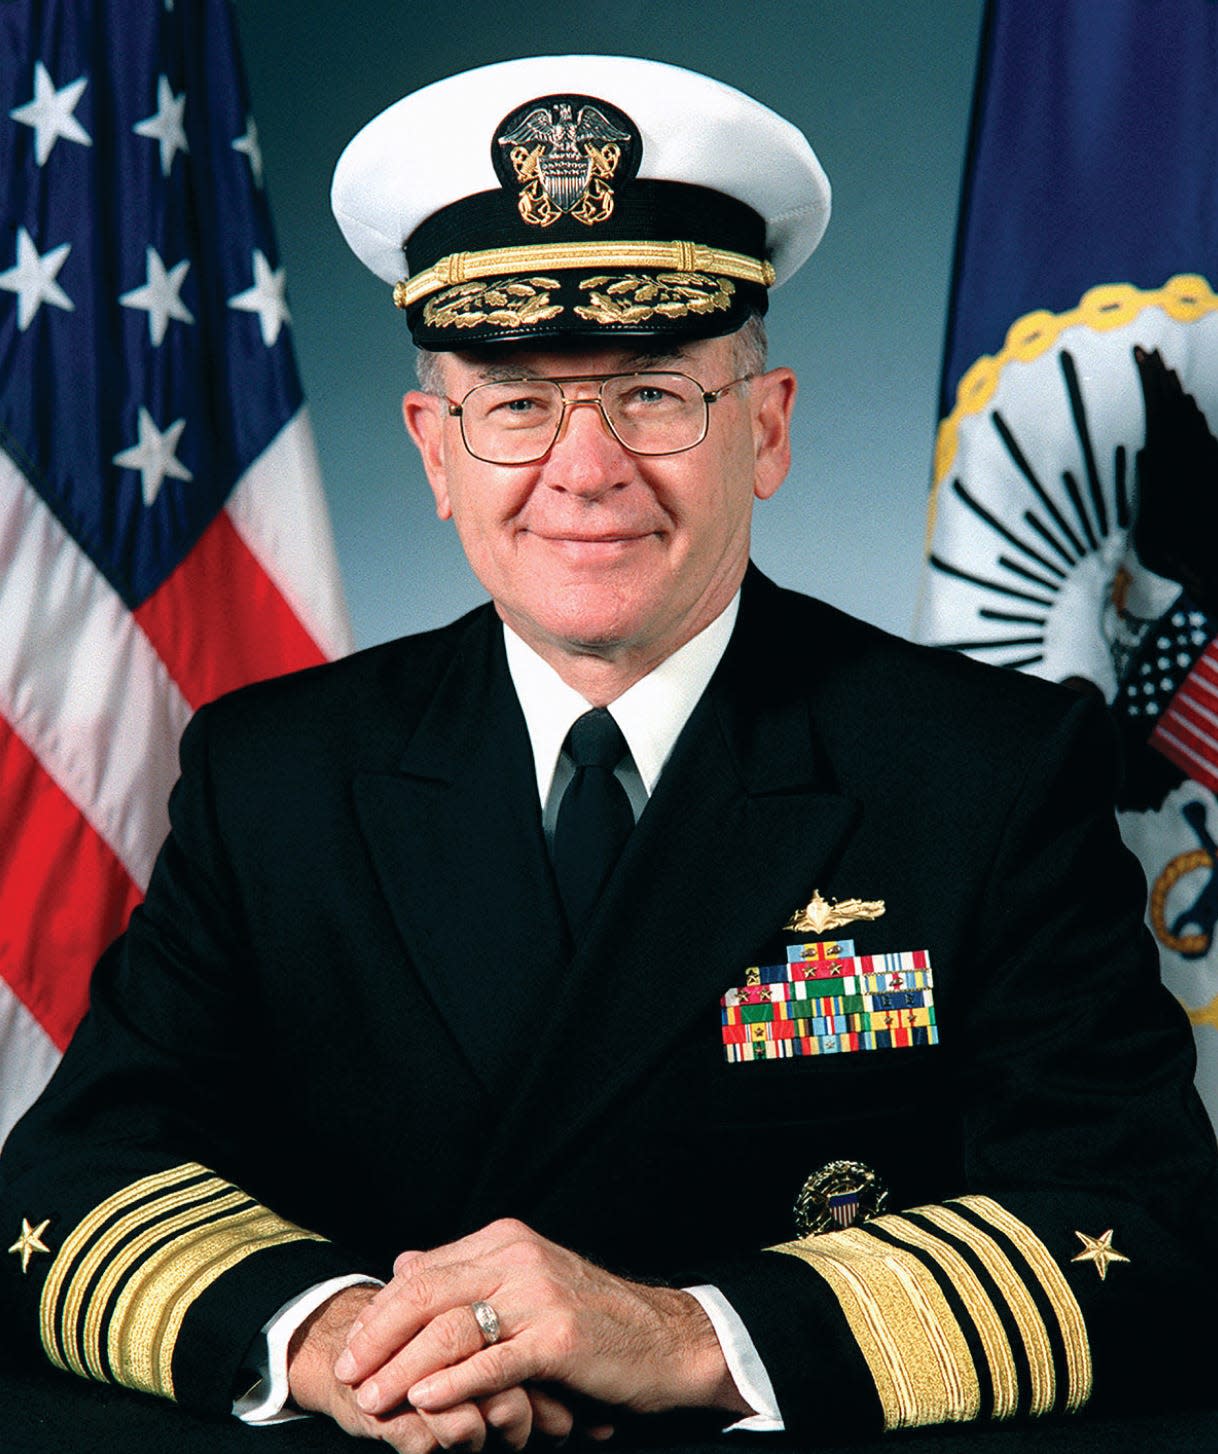 Admiral Vernon E. Clark, retired chief of naval operations for the U.S. Navy, will speak at the May 2 commencement for Evangel University and the Assemblies of God Theological Seminary.